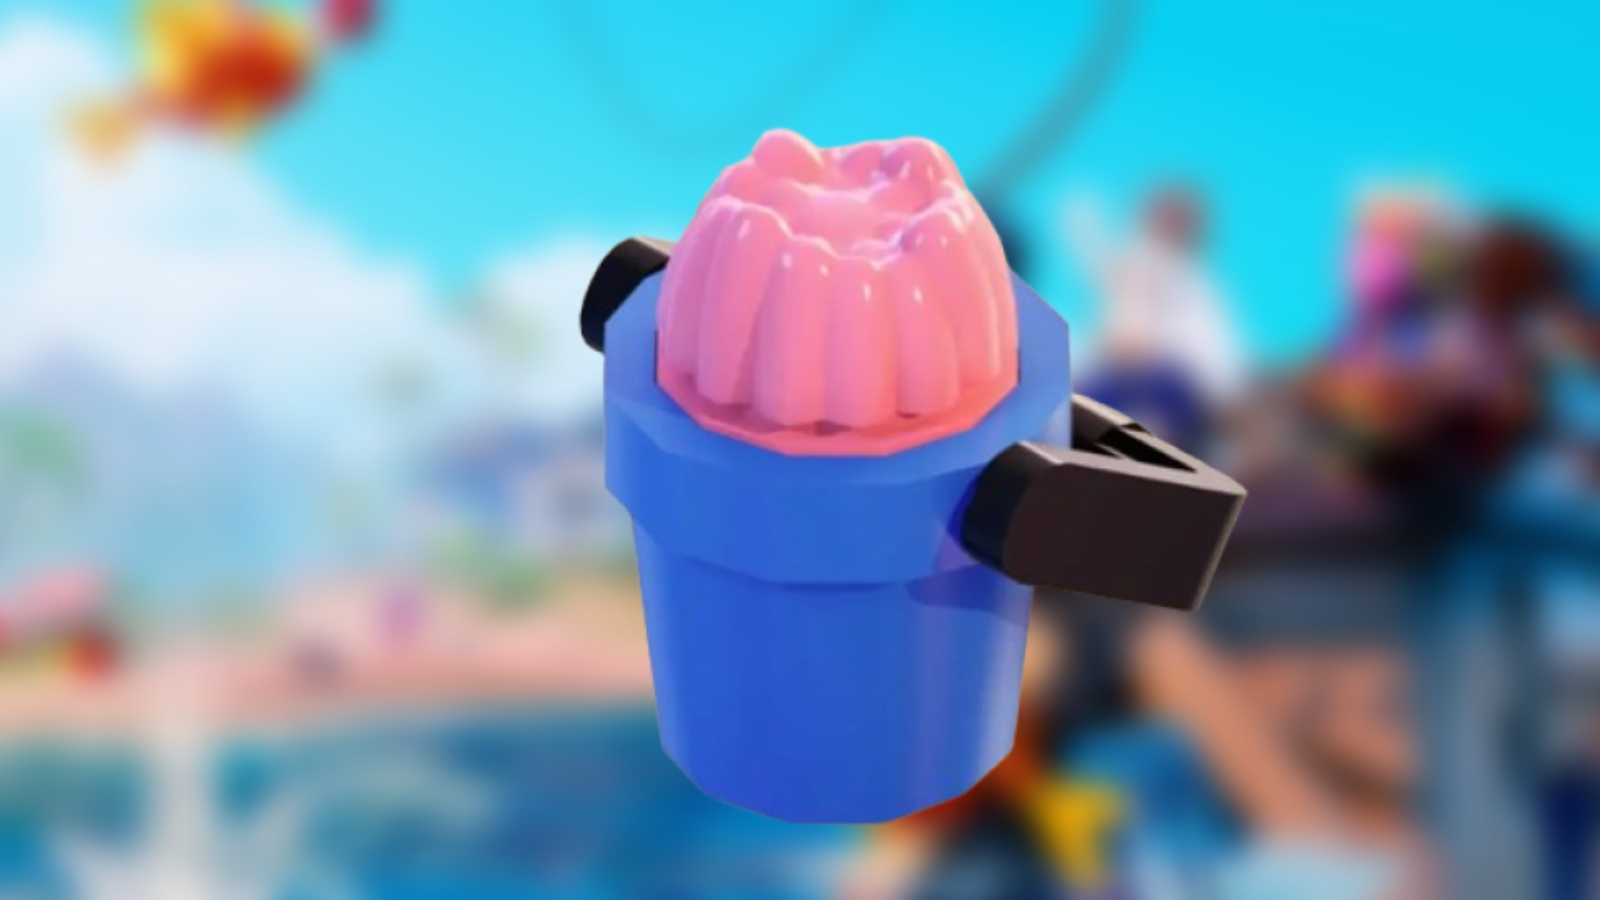 How to make Bait Buckets in Lego Fortnite